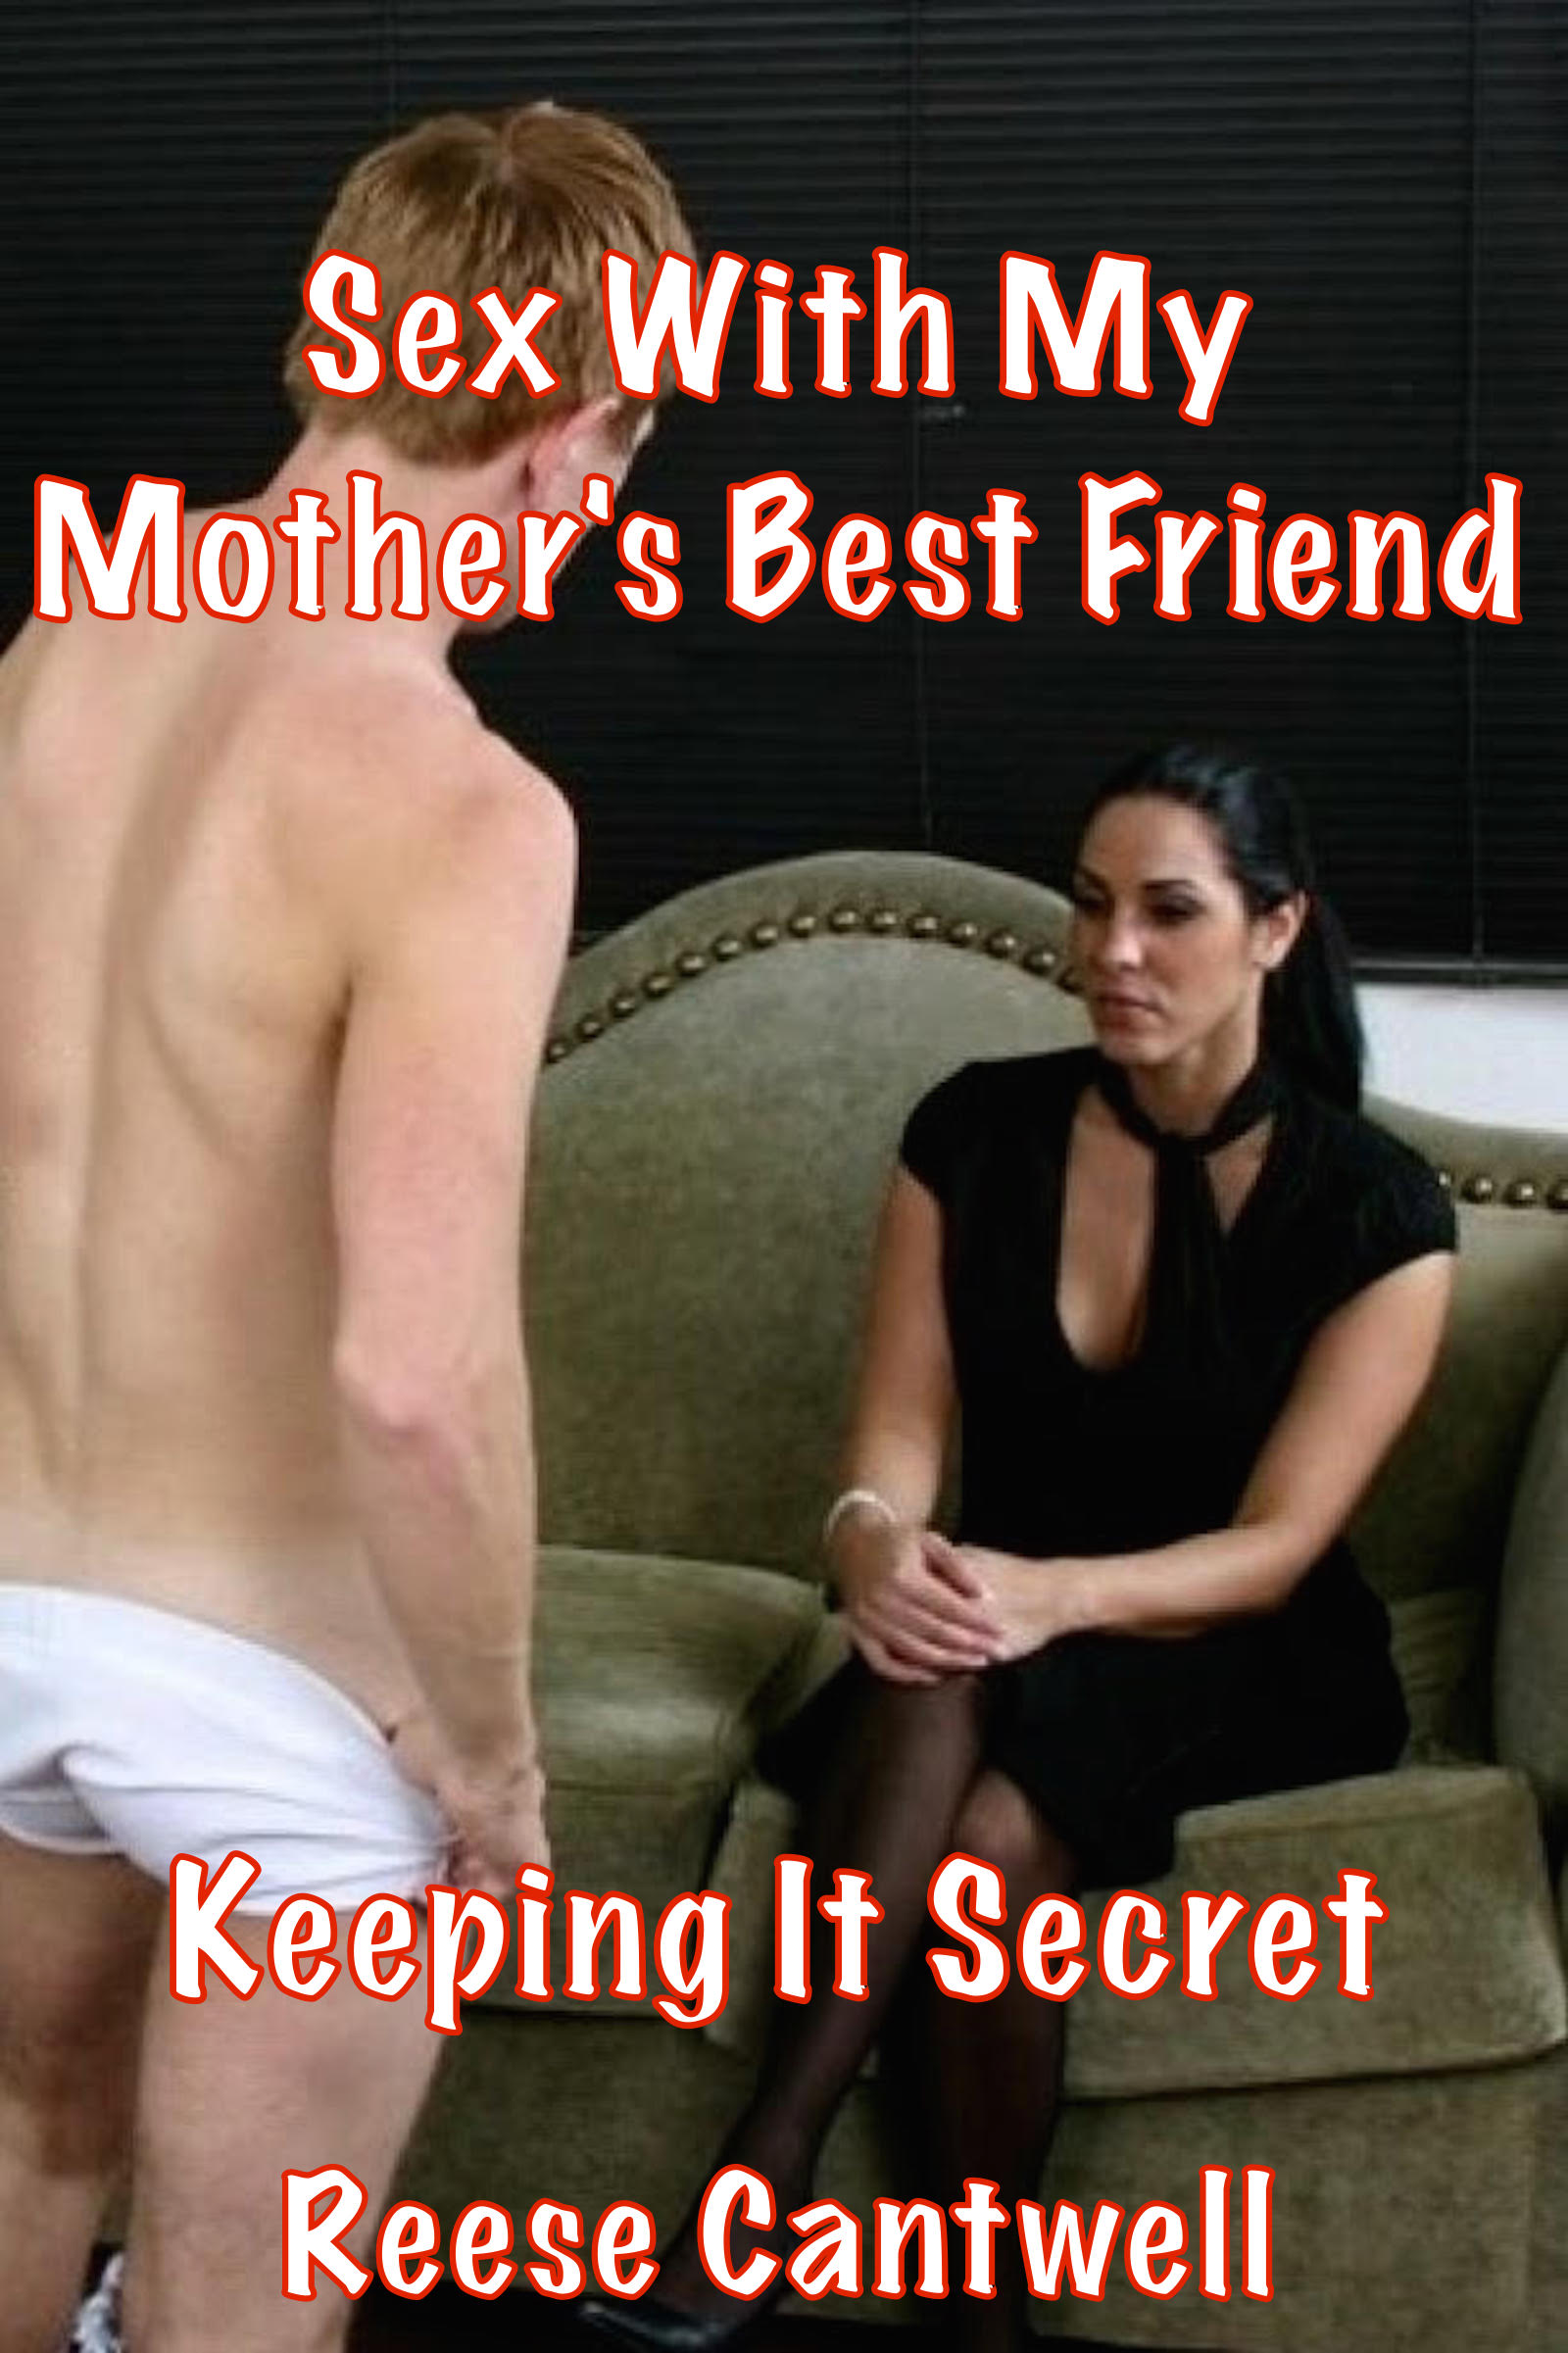 Caught By Friends Mom - Sex with My Mother's Best Friend: Keeping It Secret, an Ebook by Reese  Cantwell